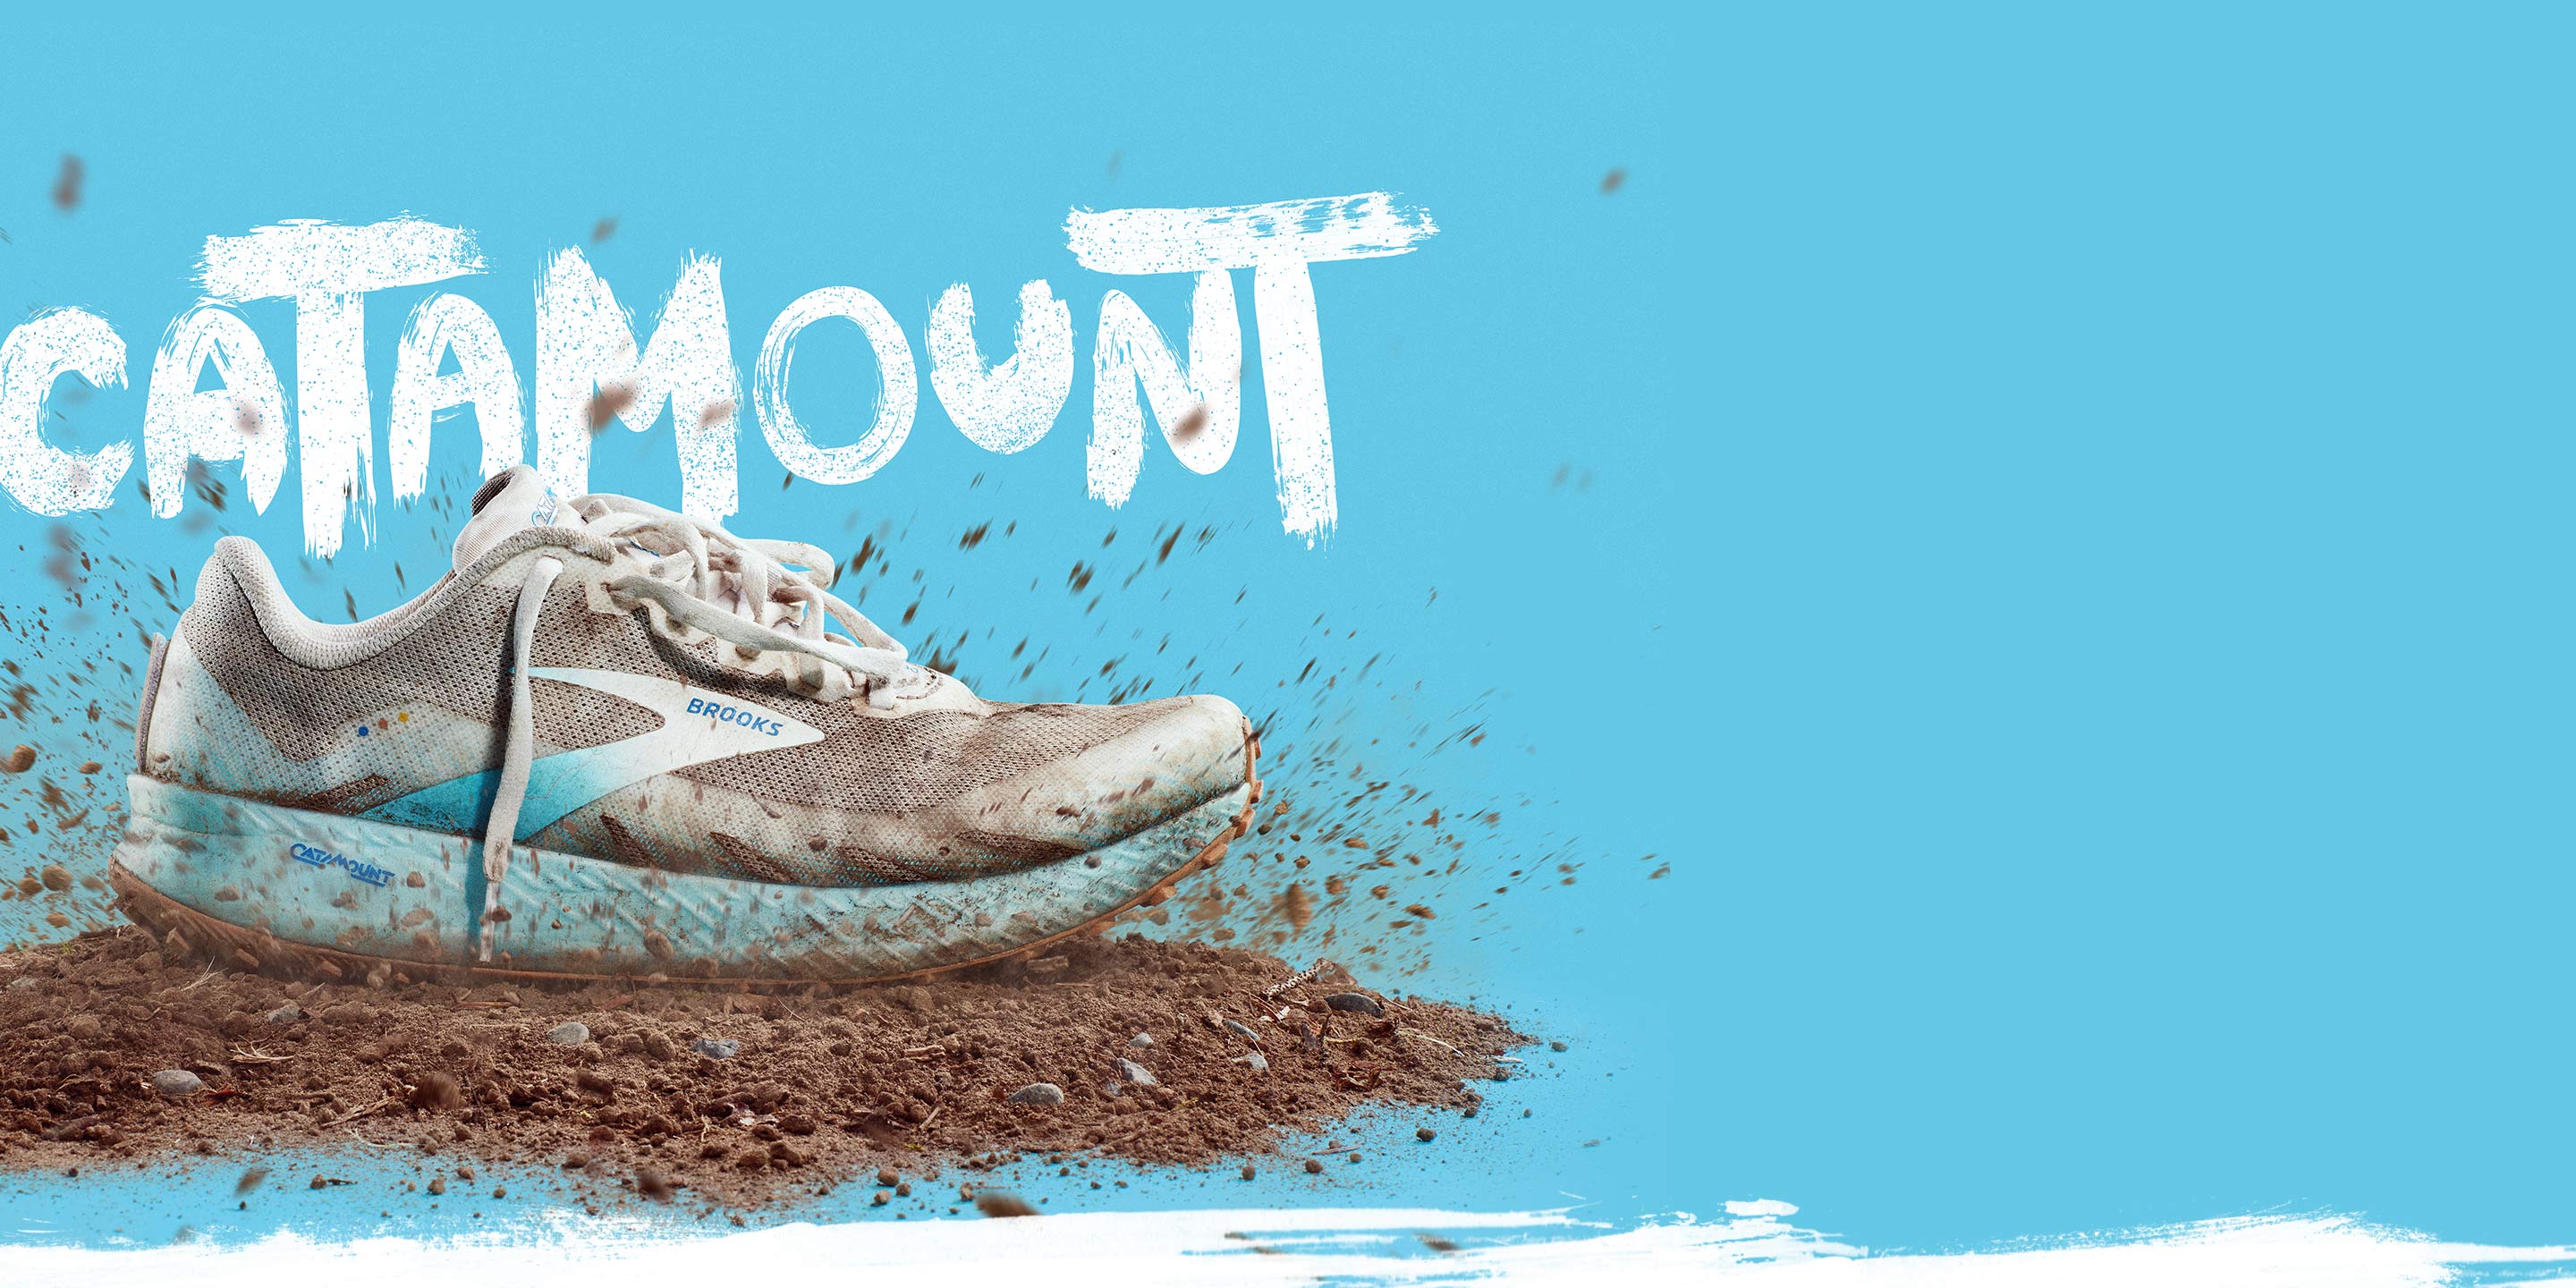 A trail shoe has just fallen on a mound of dirt, surrounded by dirt flying through the air.